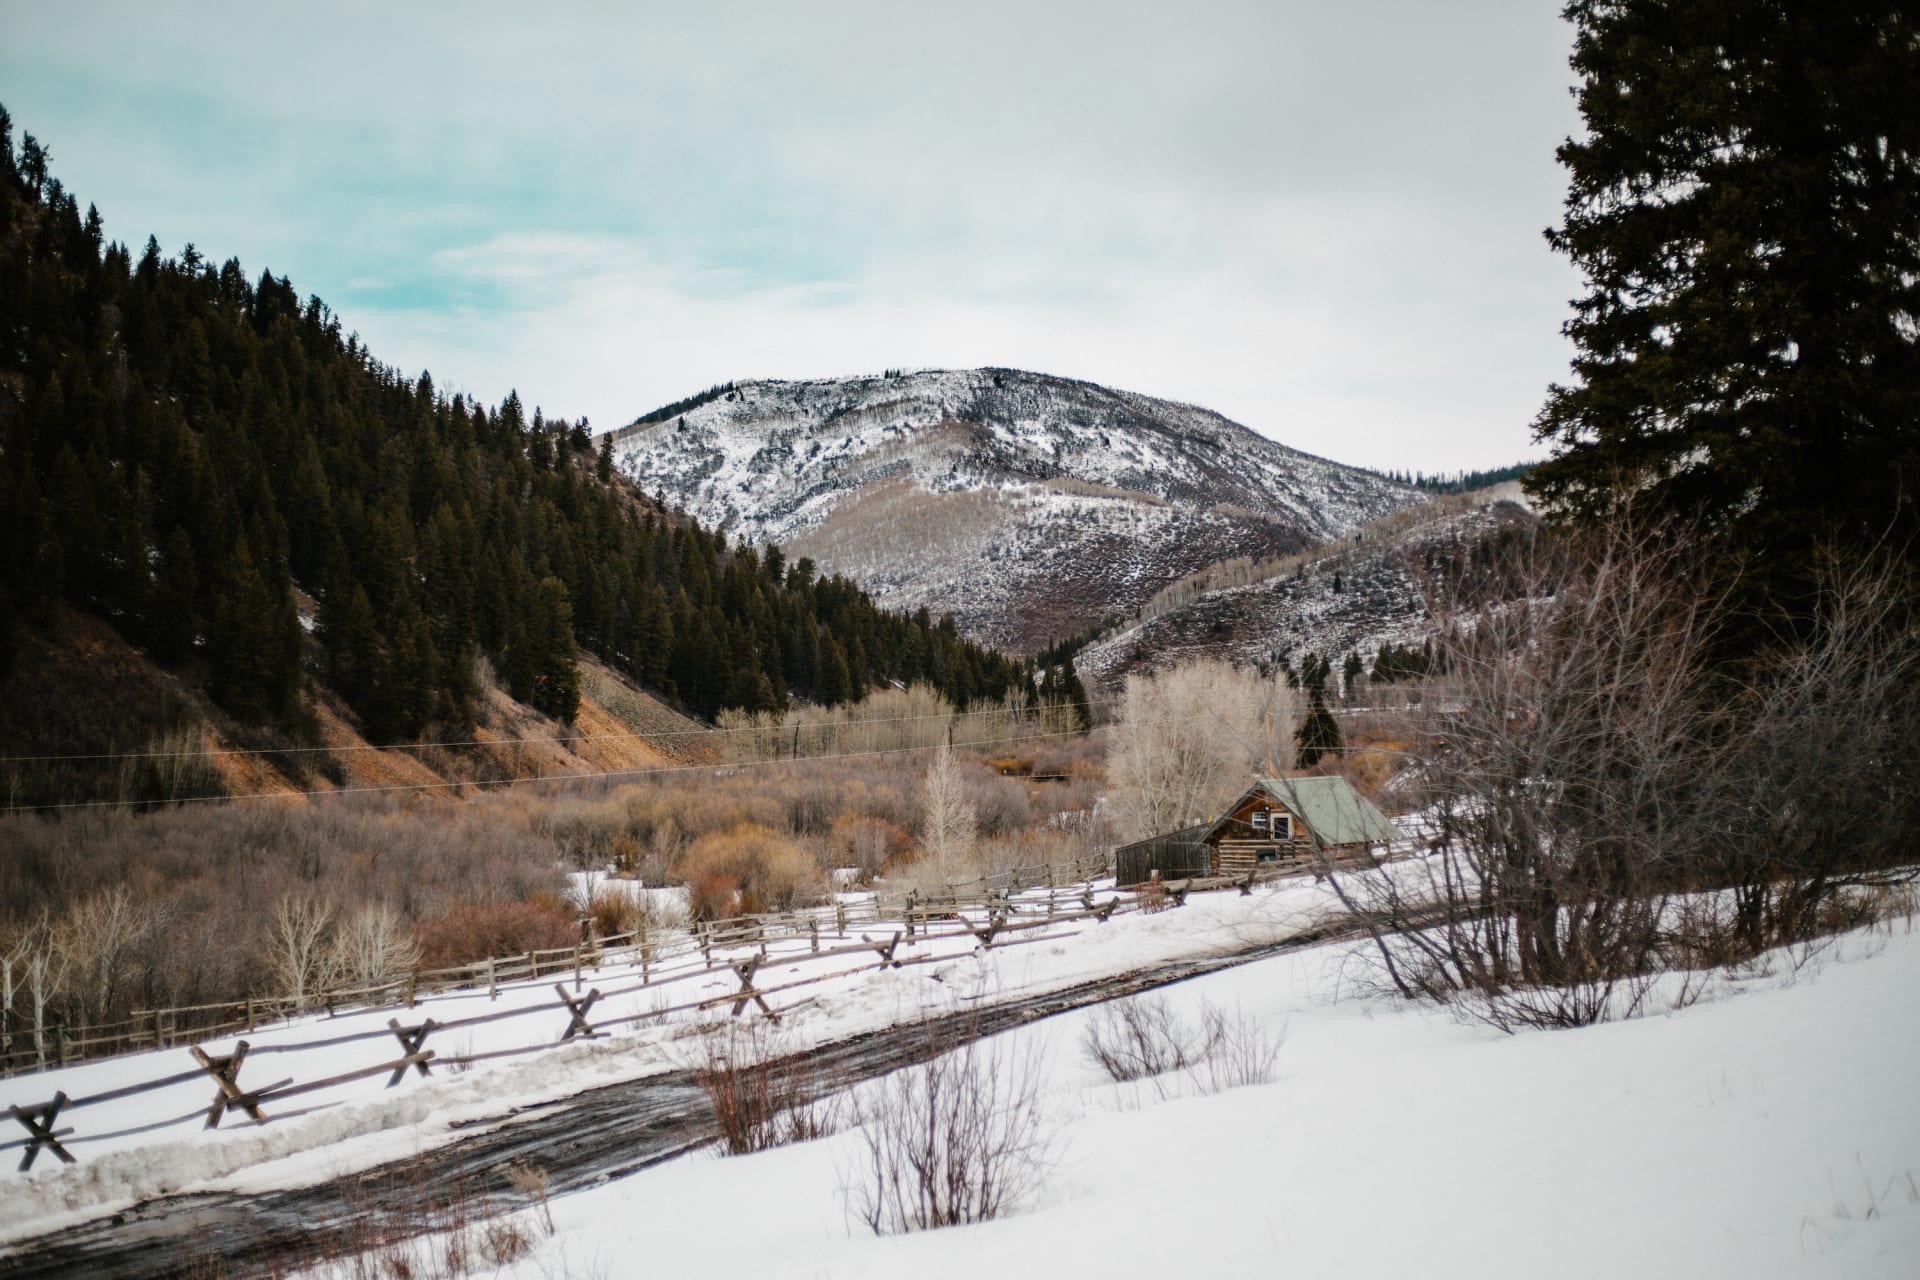 The ranch is almost 150 acres of wilderness, and boasts incredible mountain views. Guests are known to spot elk, bears and big cats!